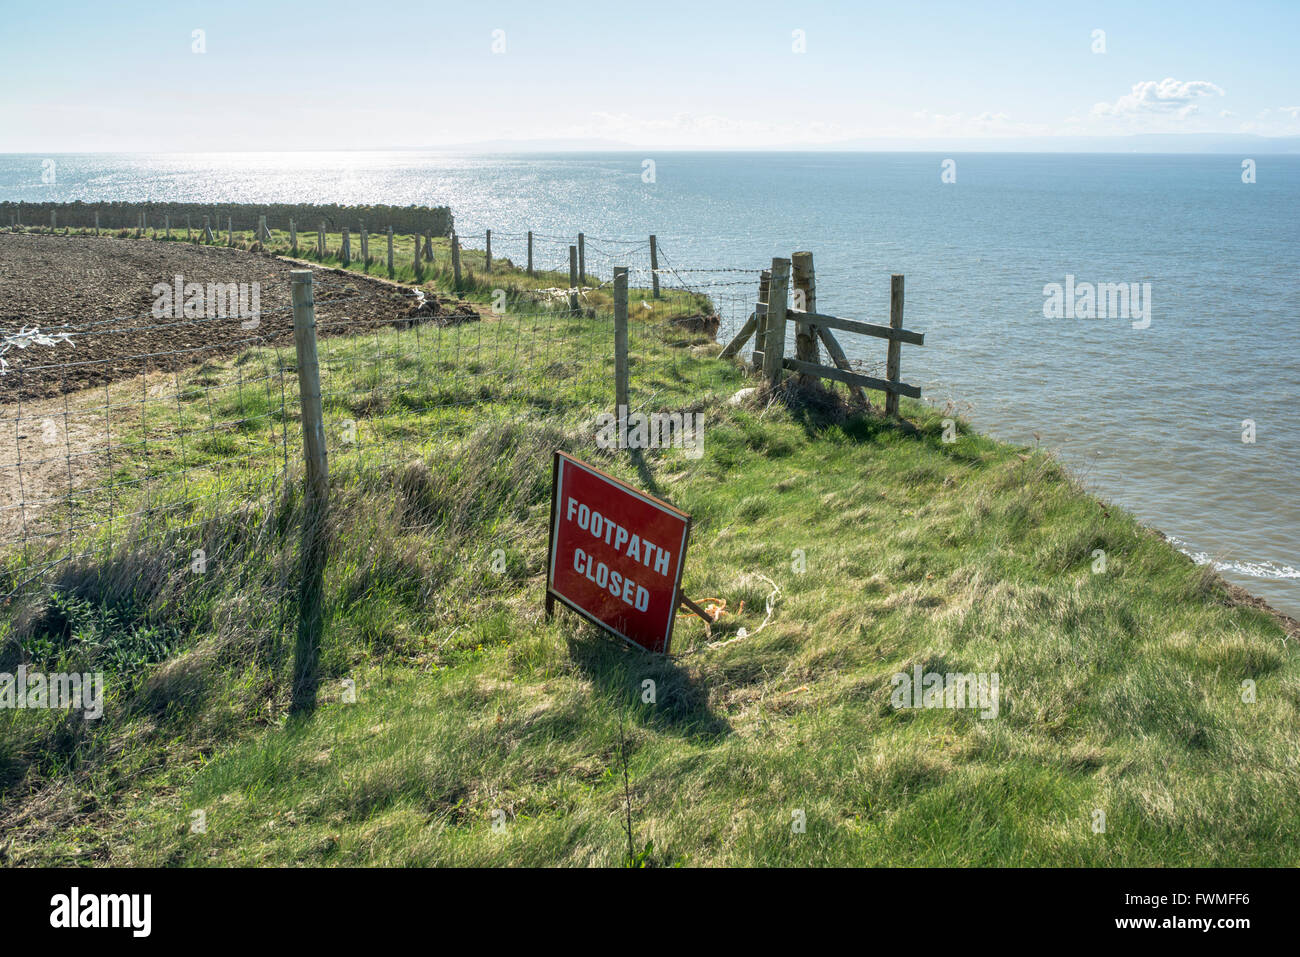 Footpath closed. Coastal erosion has caused the footpath to be moved twice Stock Photo